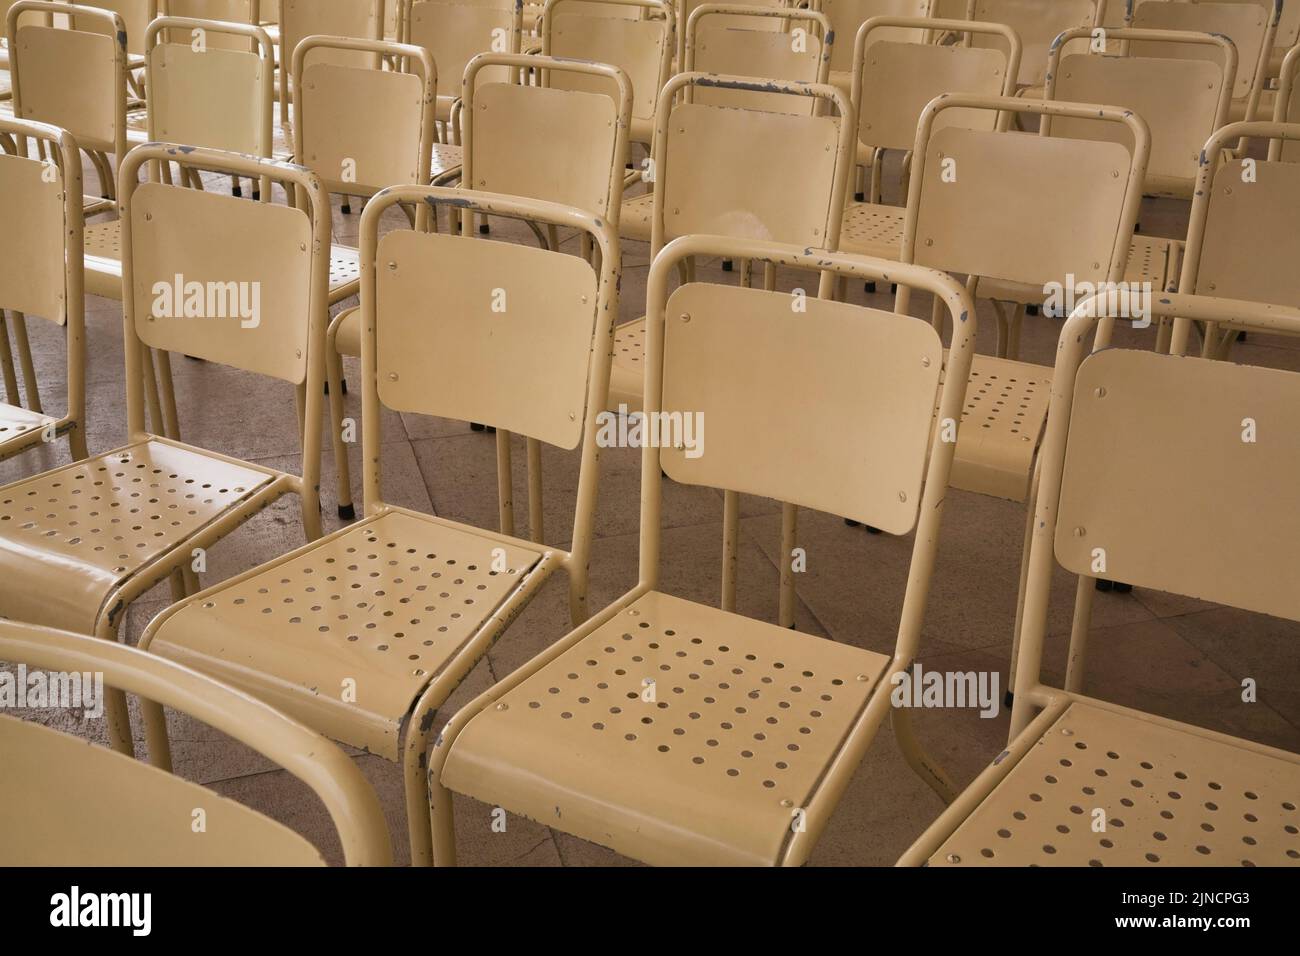 Rows of beige high back metal chairs outdoors, Fatima, Portugal Stock Photo